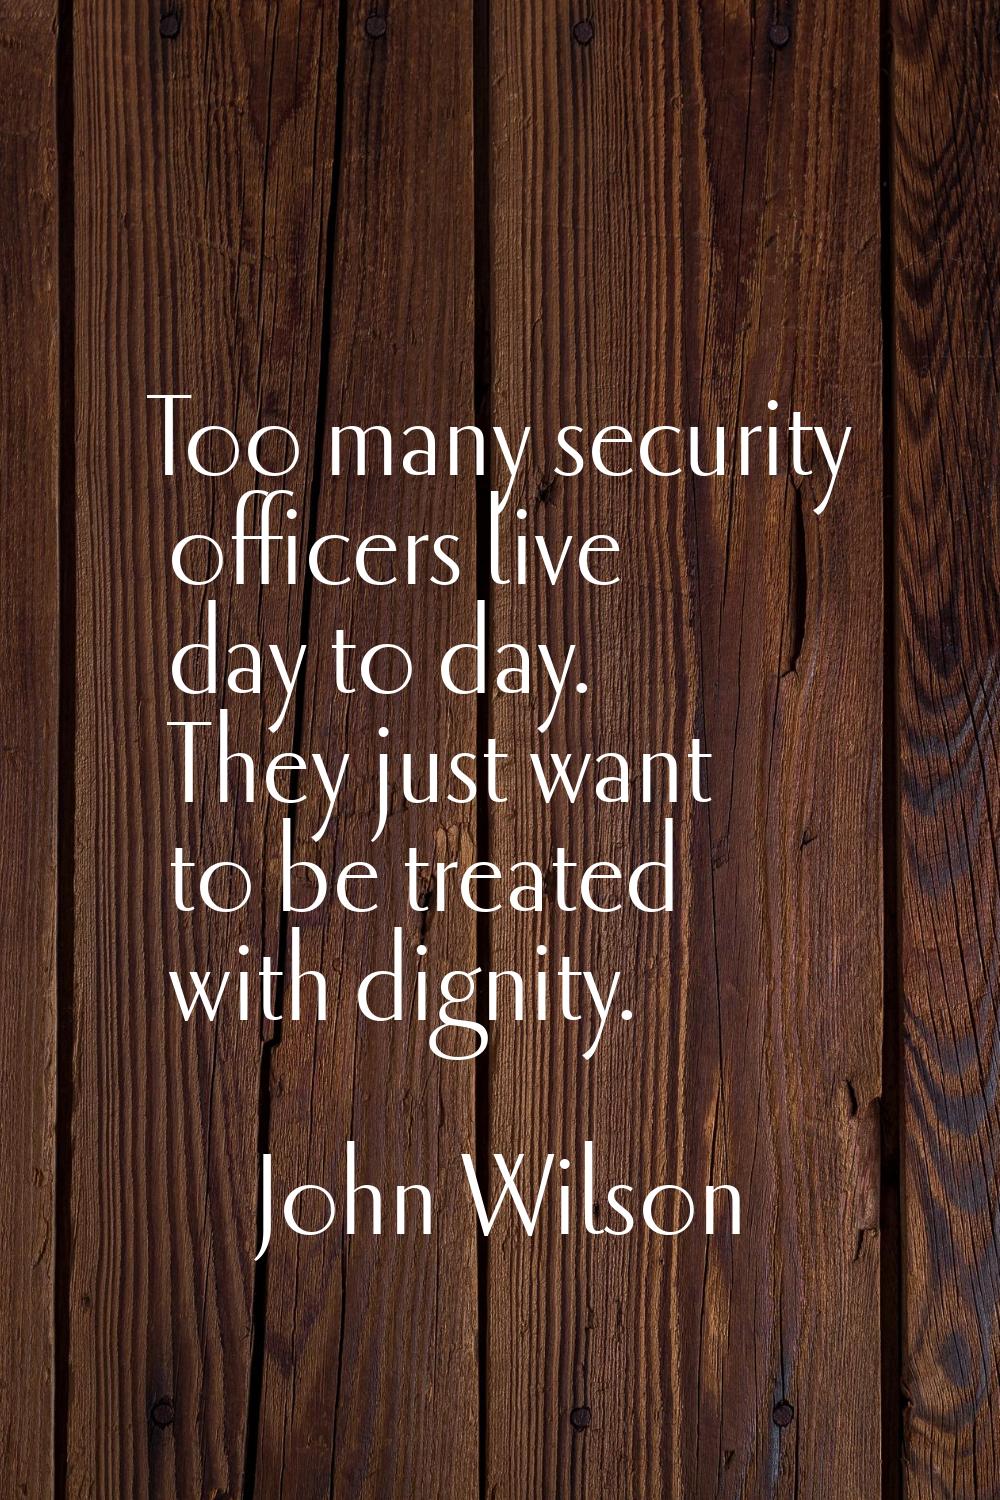 Too many security officers live day to day. They just want to be treated with dignity.